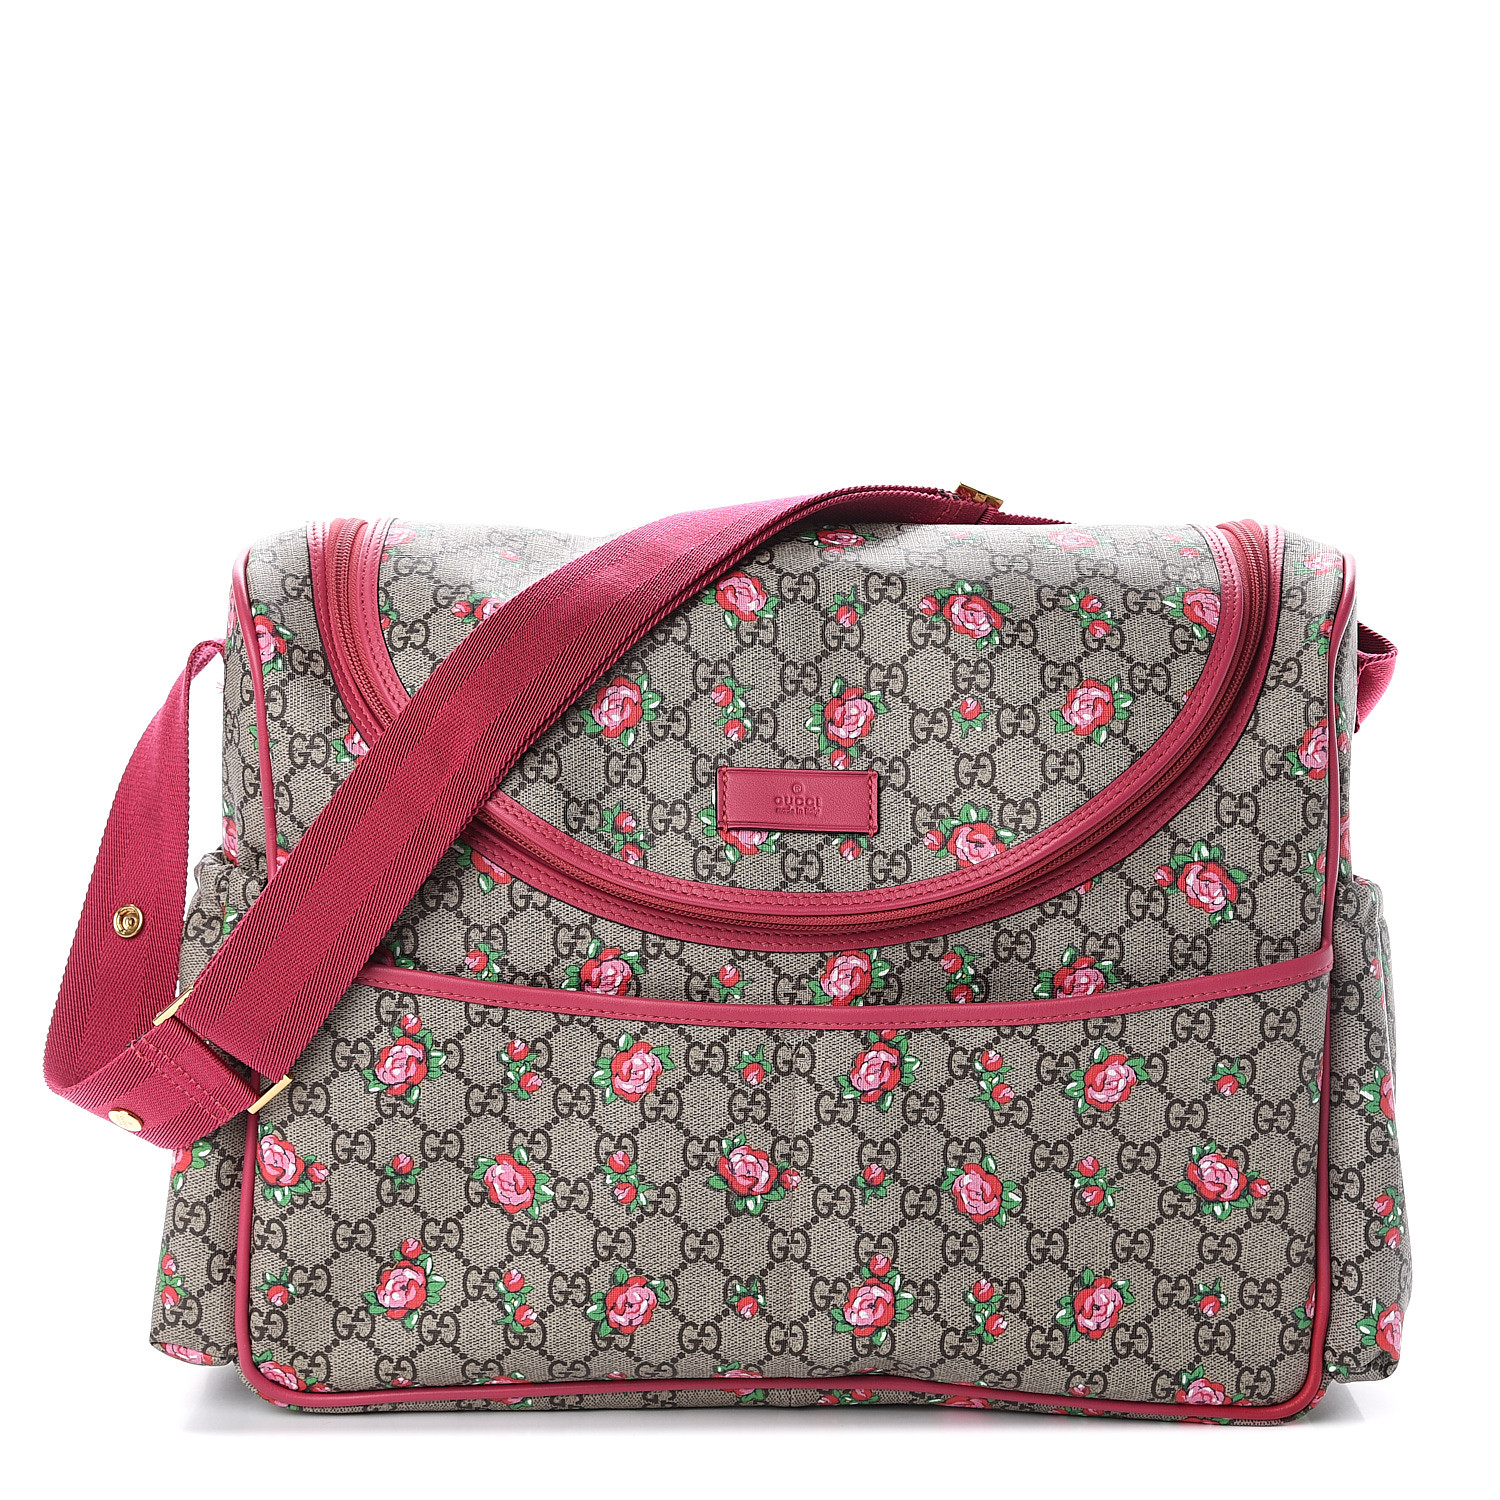 gucci diaper bag with roses